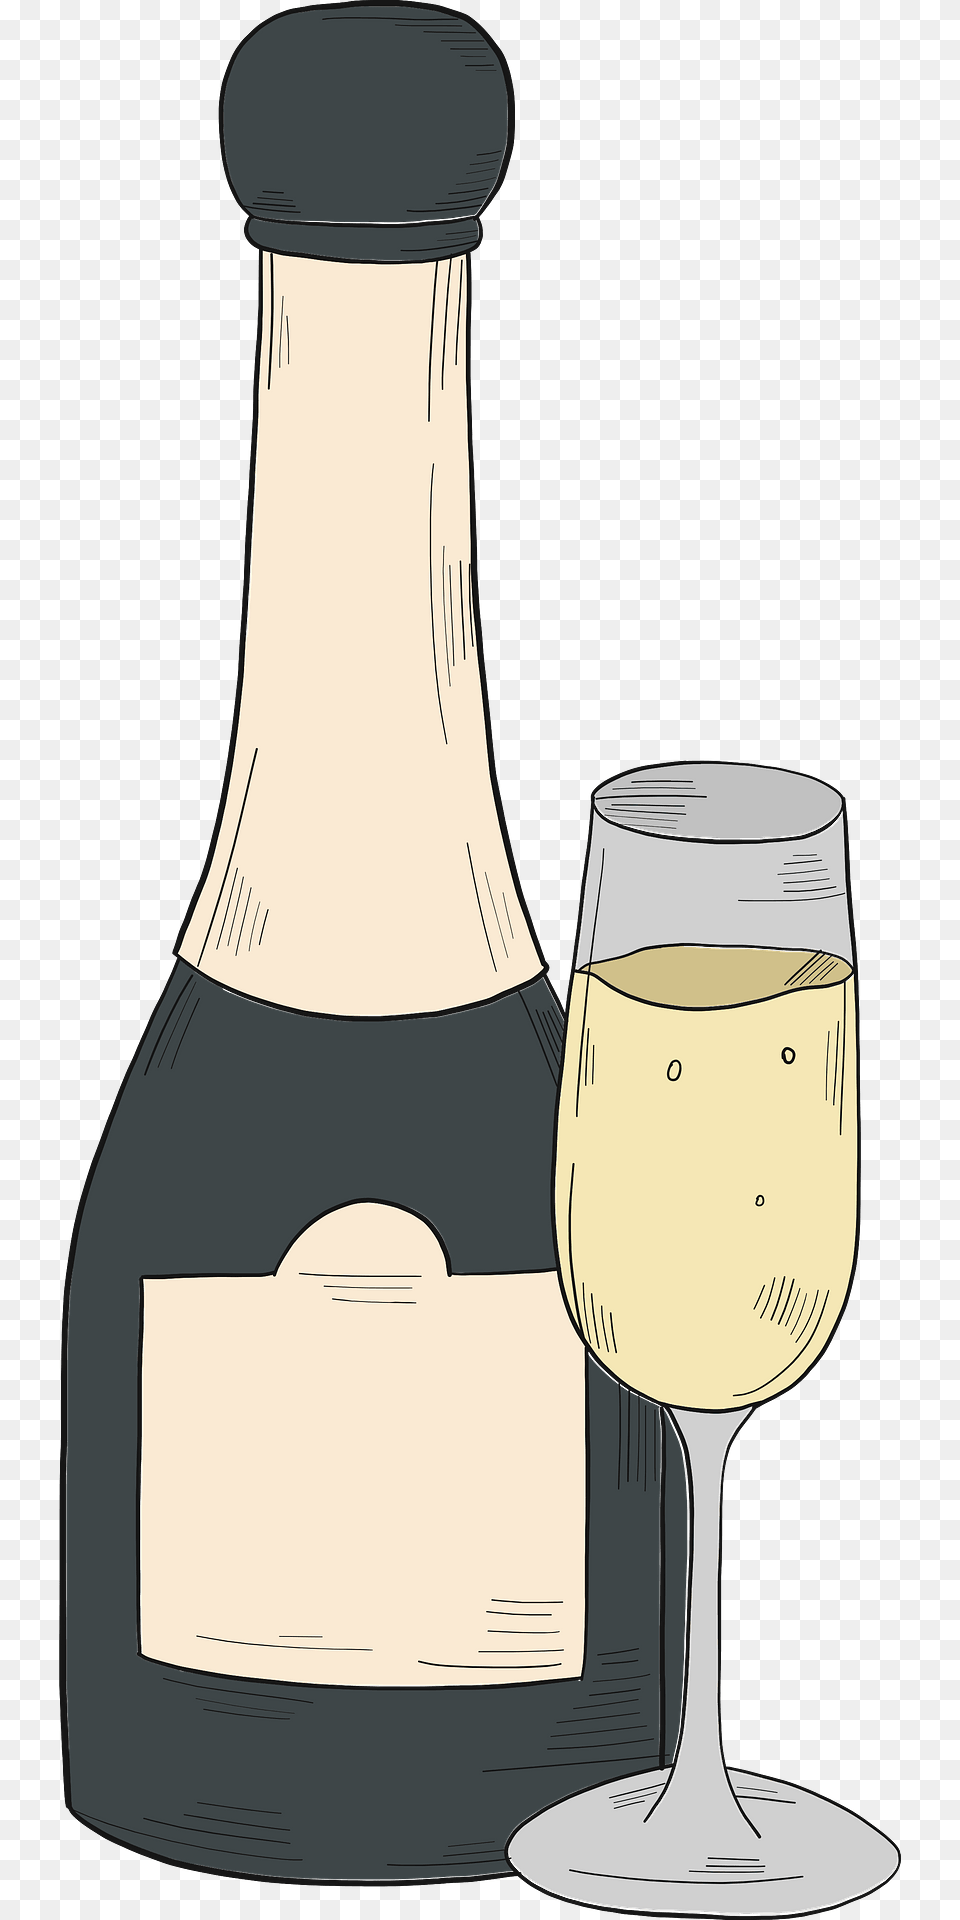 Champagne Bottle And Glass Clipart, Alcohol, Beverage, Liquor, Wine Bottle Free Transparent Png